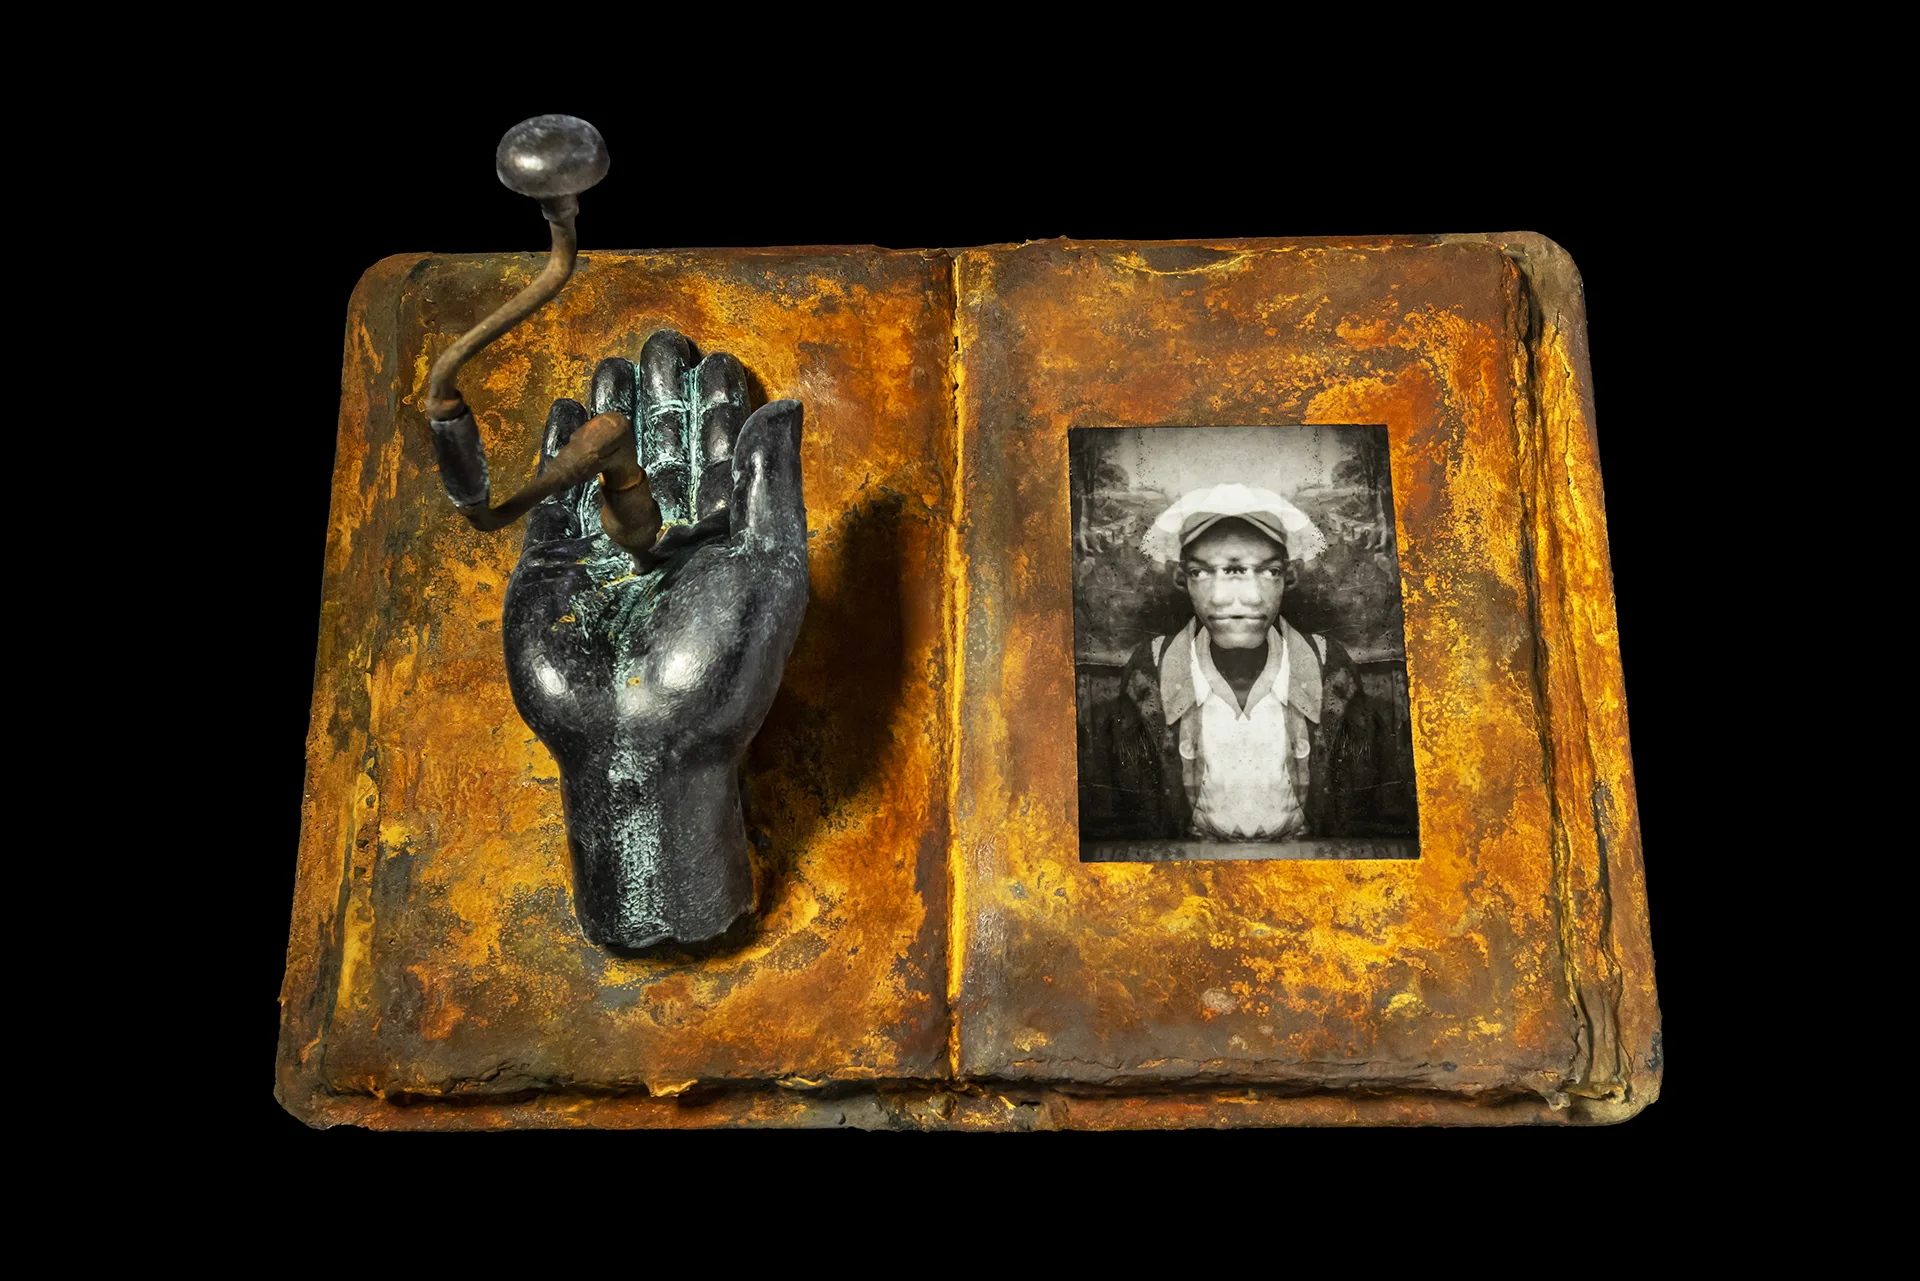 A metal, bronze book has a sculpture with a hand rising out its leftside and an antique, blurred photo of a man on the right side